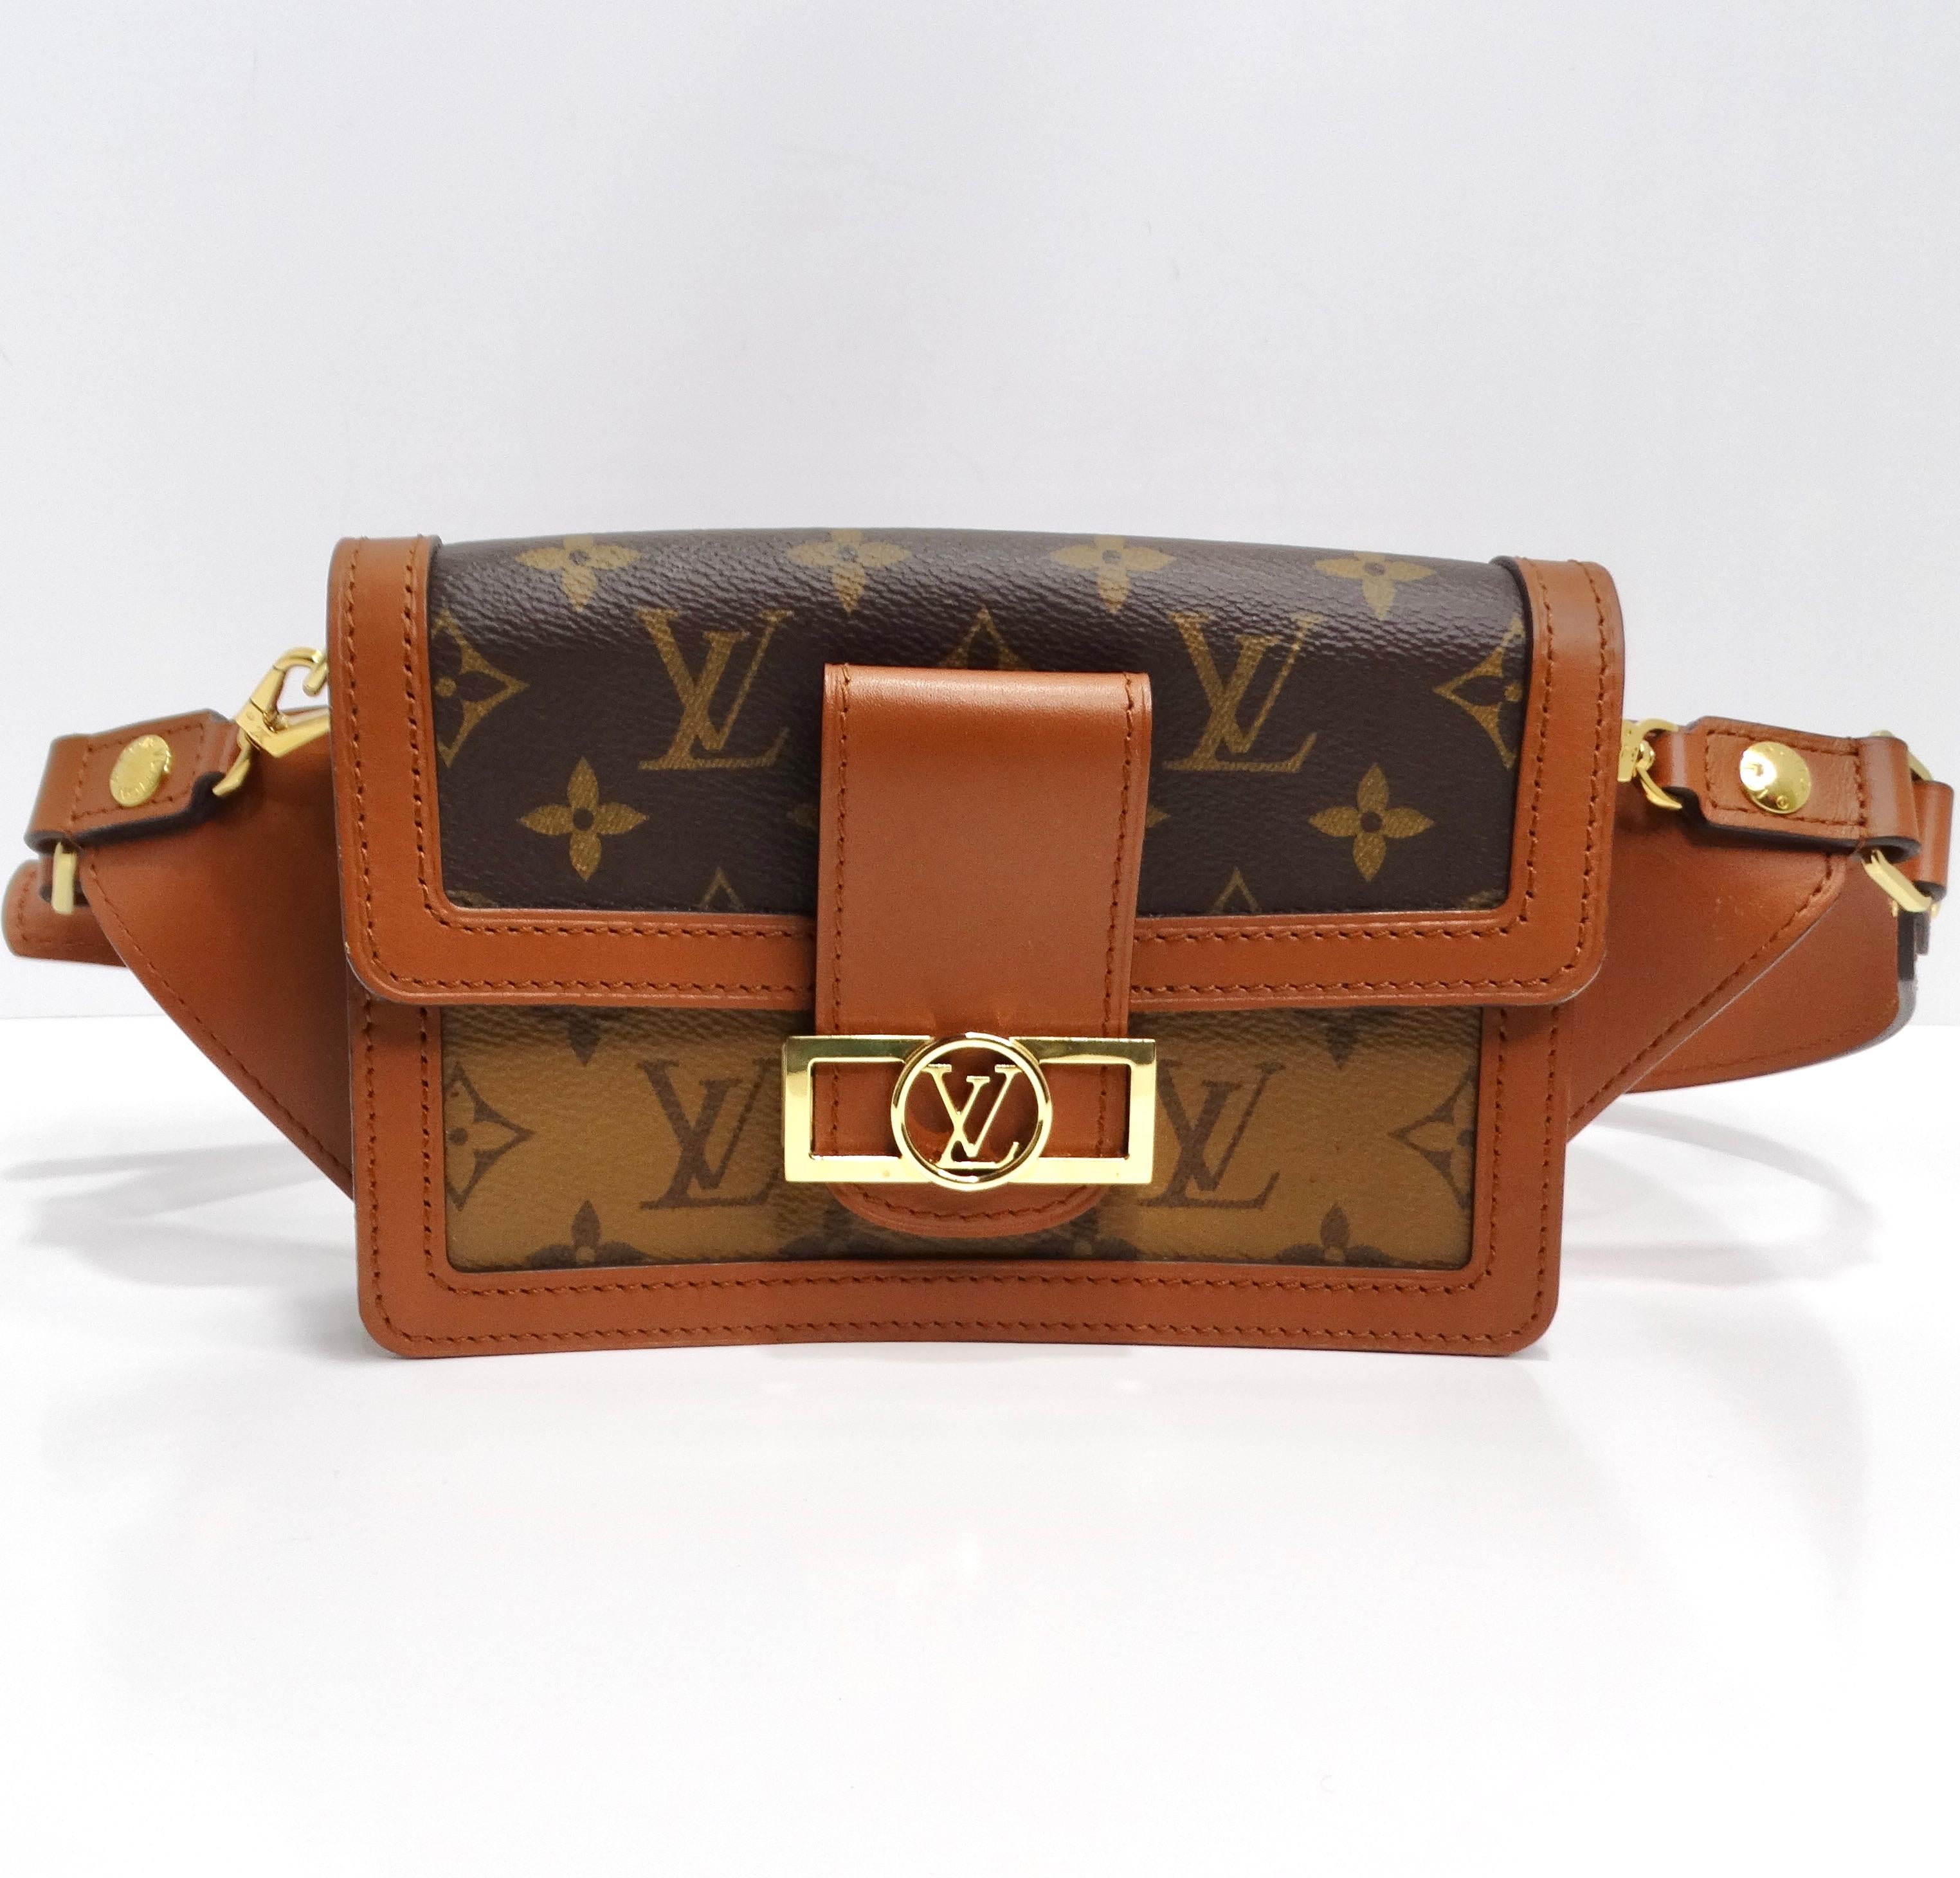 Introducing the Louis Vuitton Reverse Monogram Dauphine Bumbag, a stylish accessory that seamlessly combines luxury and functionality. Crafted from Louis Vuitton monogram on toile canvas, this bag exudes sophistication and elegance.

The bag